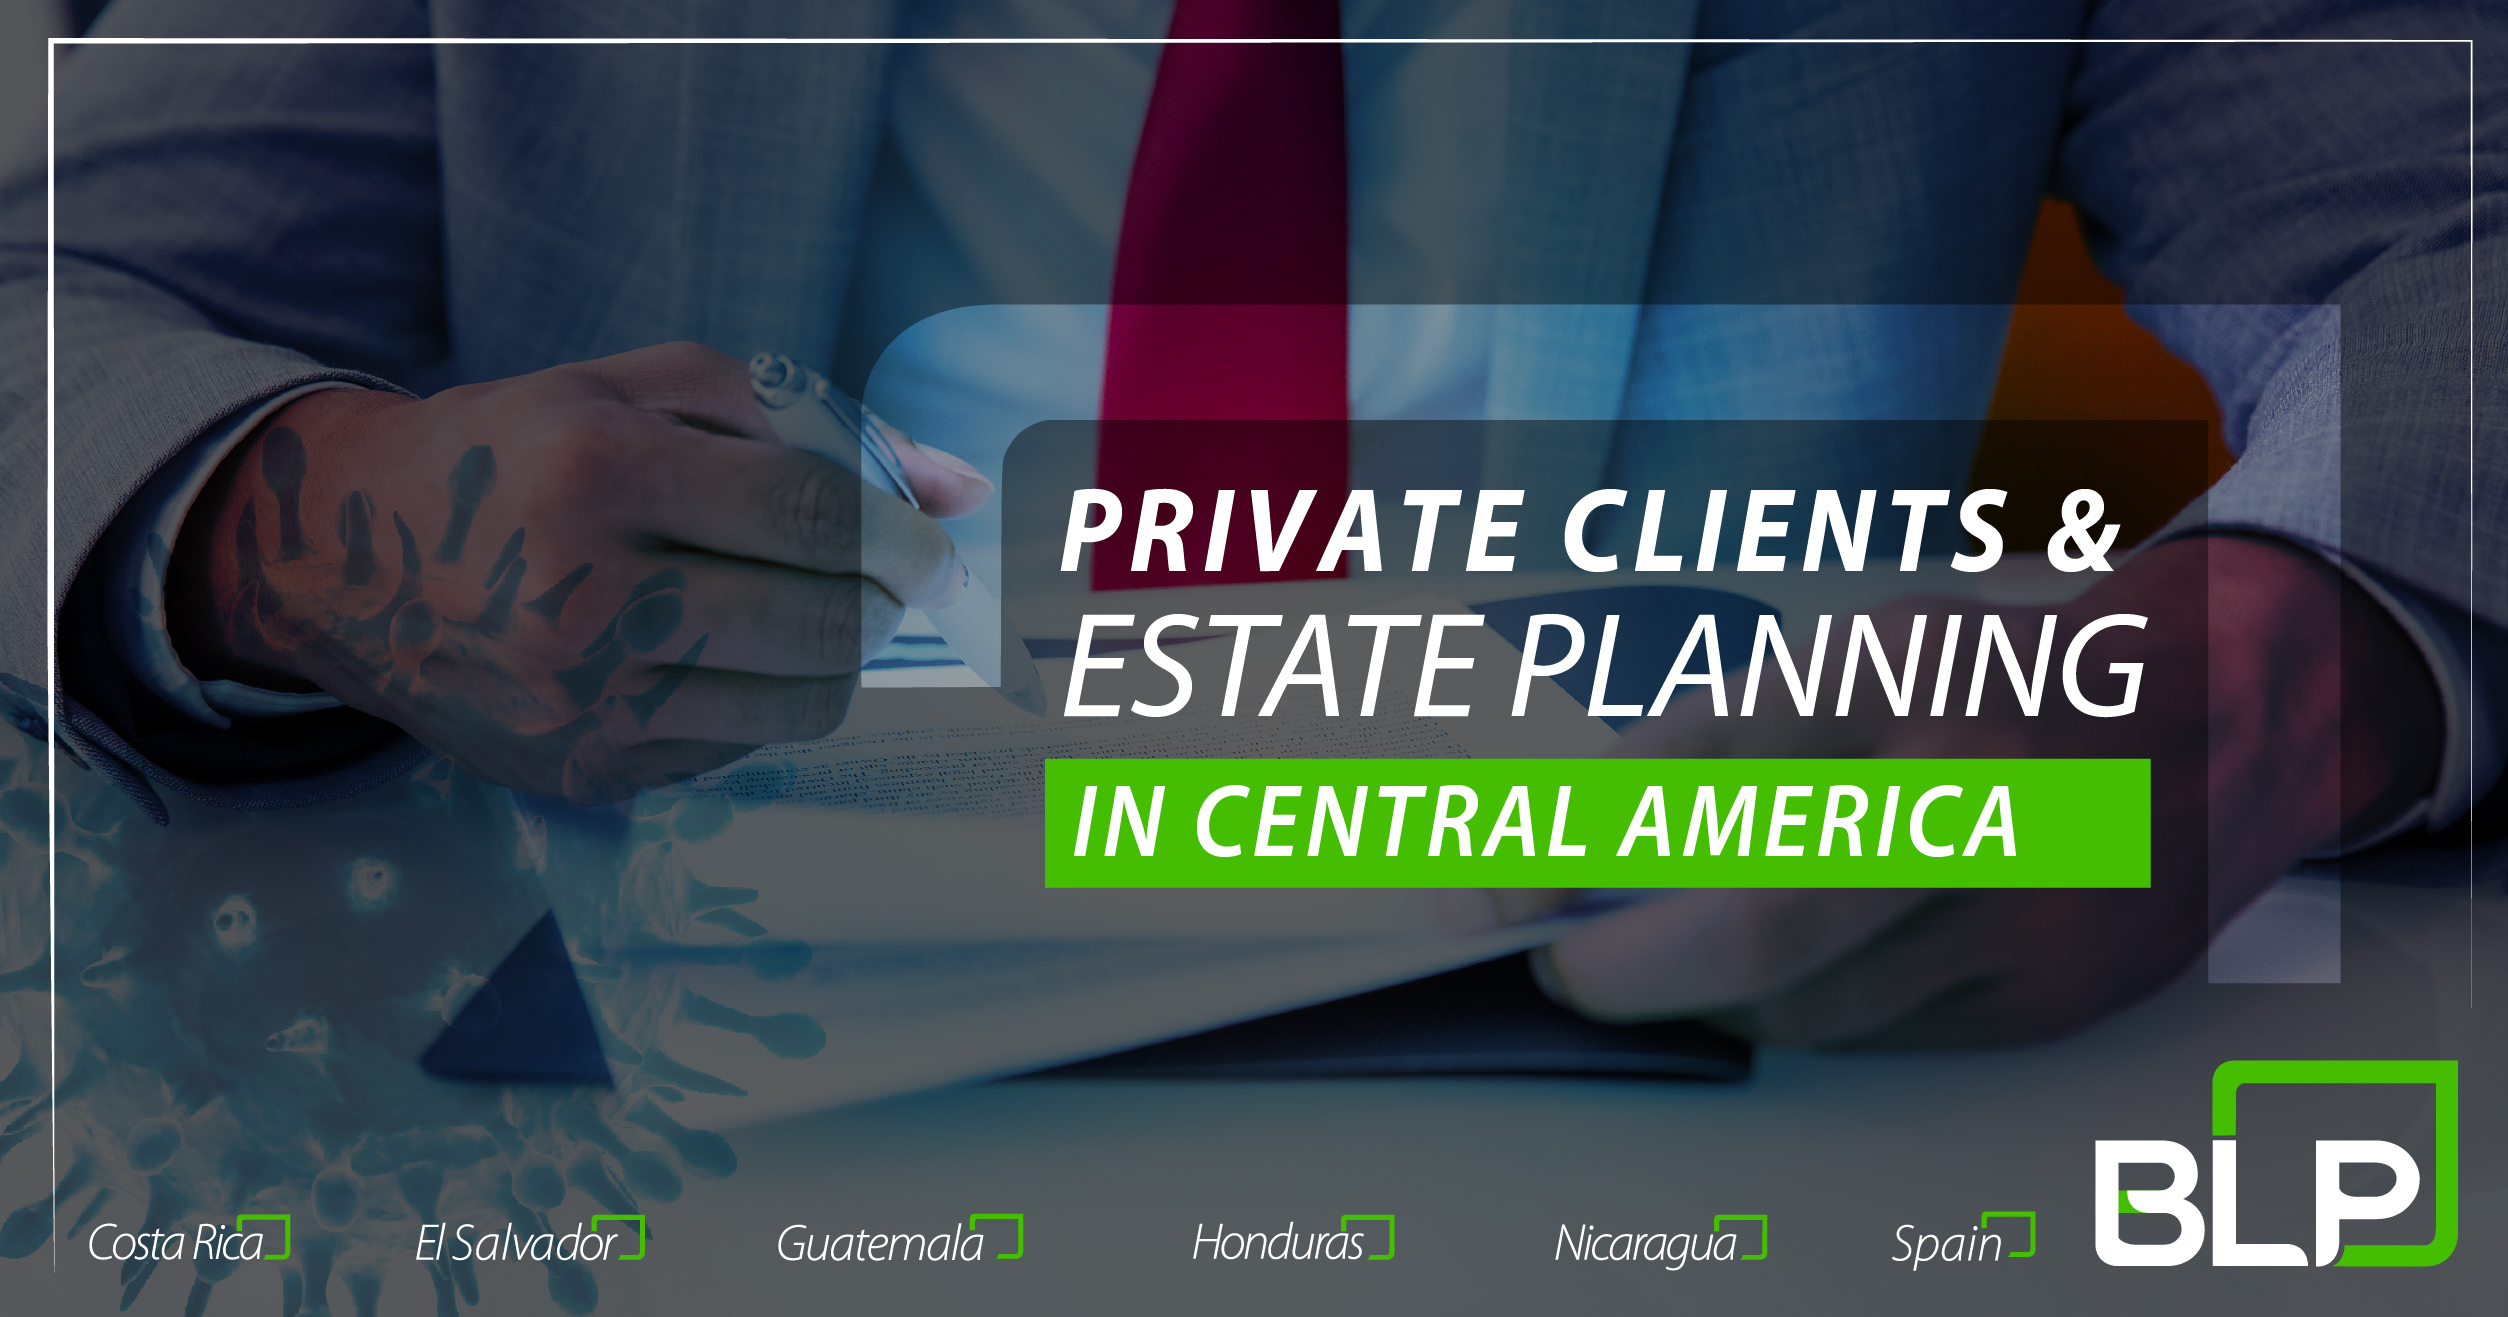 BLP offers the Private Clients & Estate Planning practice area in Central America to its clients and friends